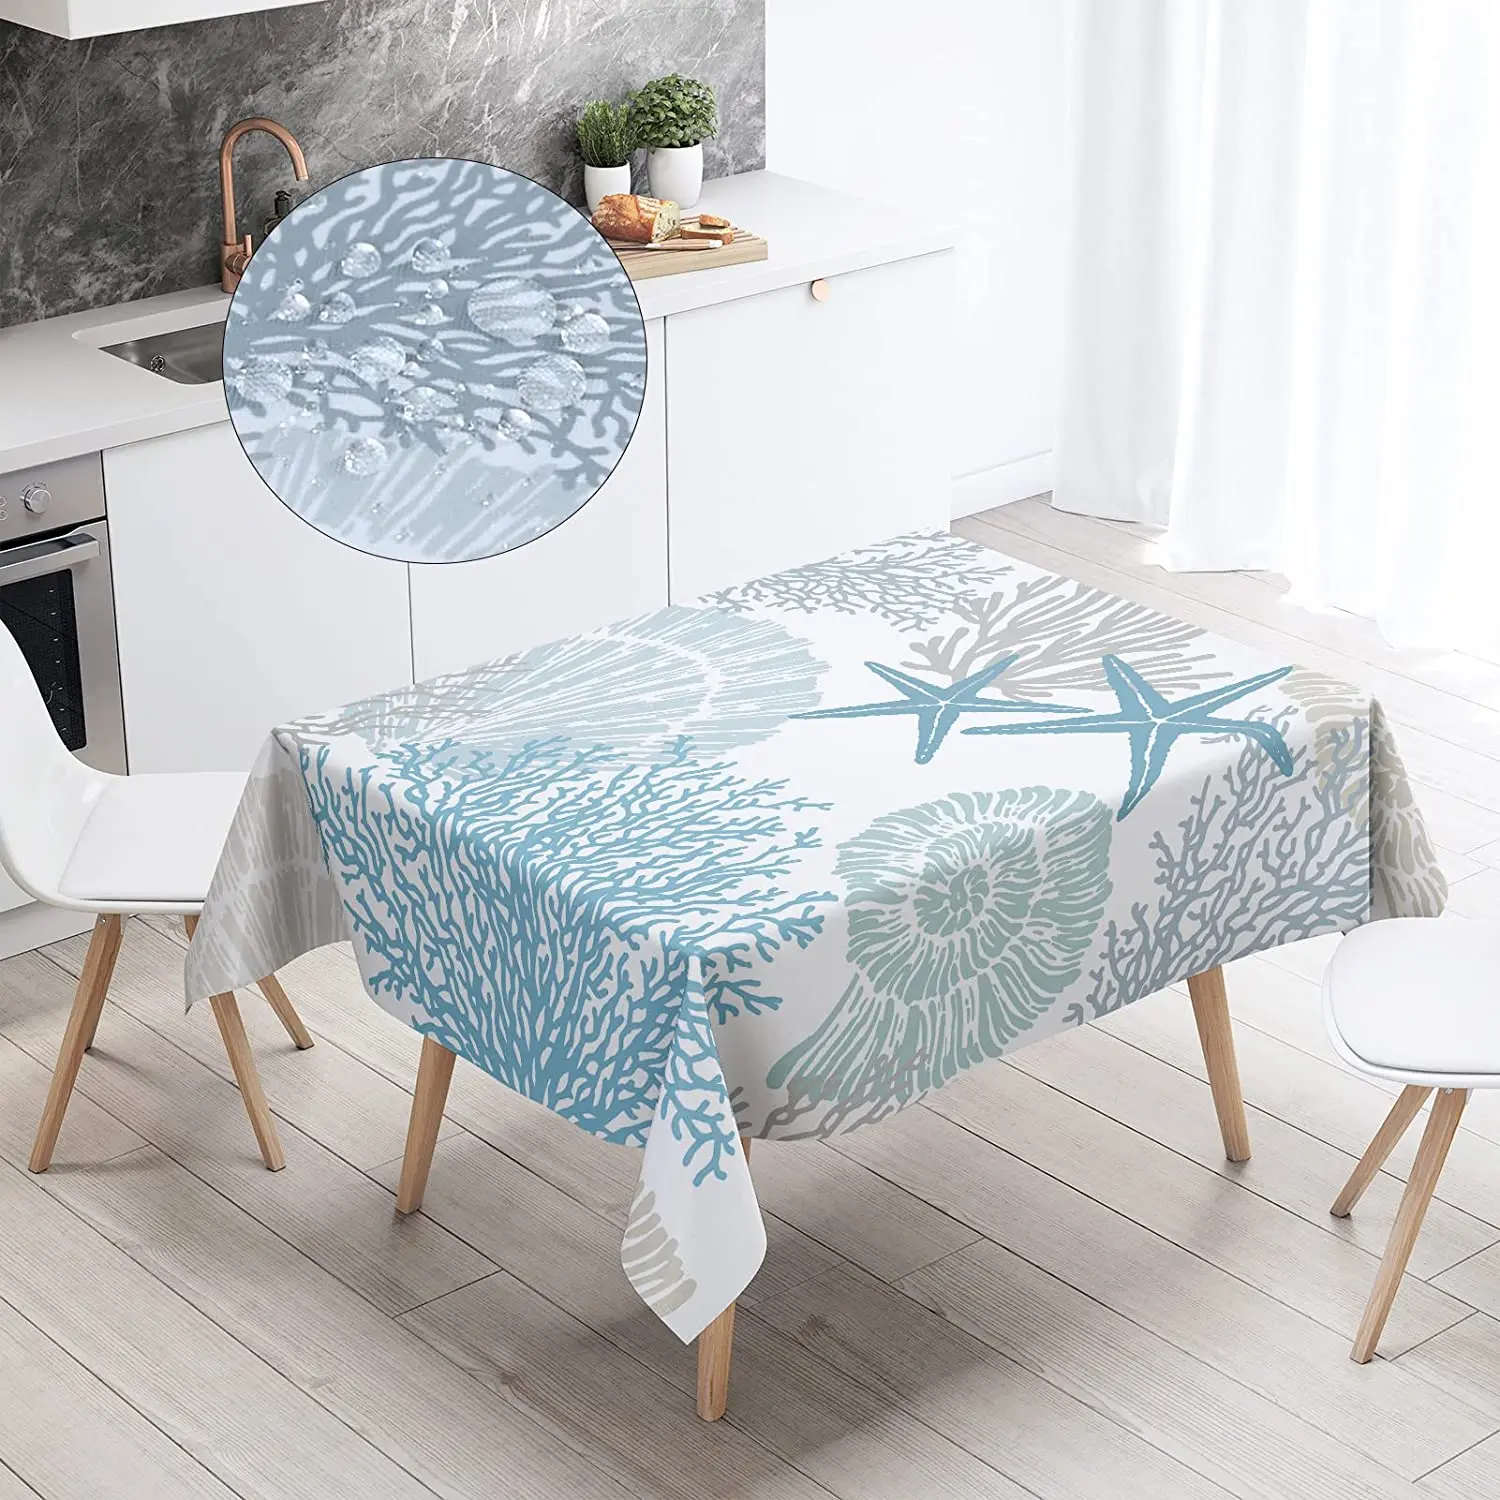 https://ae01.alicdn.com/kf/S621030d09e104987a2d5358e40016dc7J/Nautical-Ocean-Themed-Fashion-Waterproof-Tablecloth-Wedding-Decor-Rectangle-Table-Cover-Holiday-Party-Kitchen-Decor-Accessories.jpg